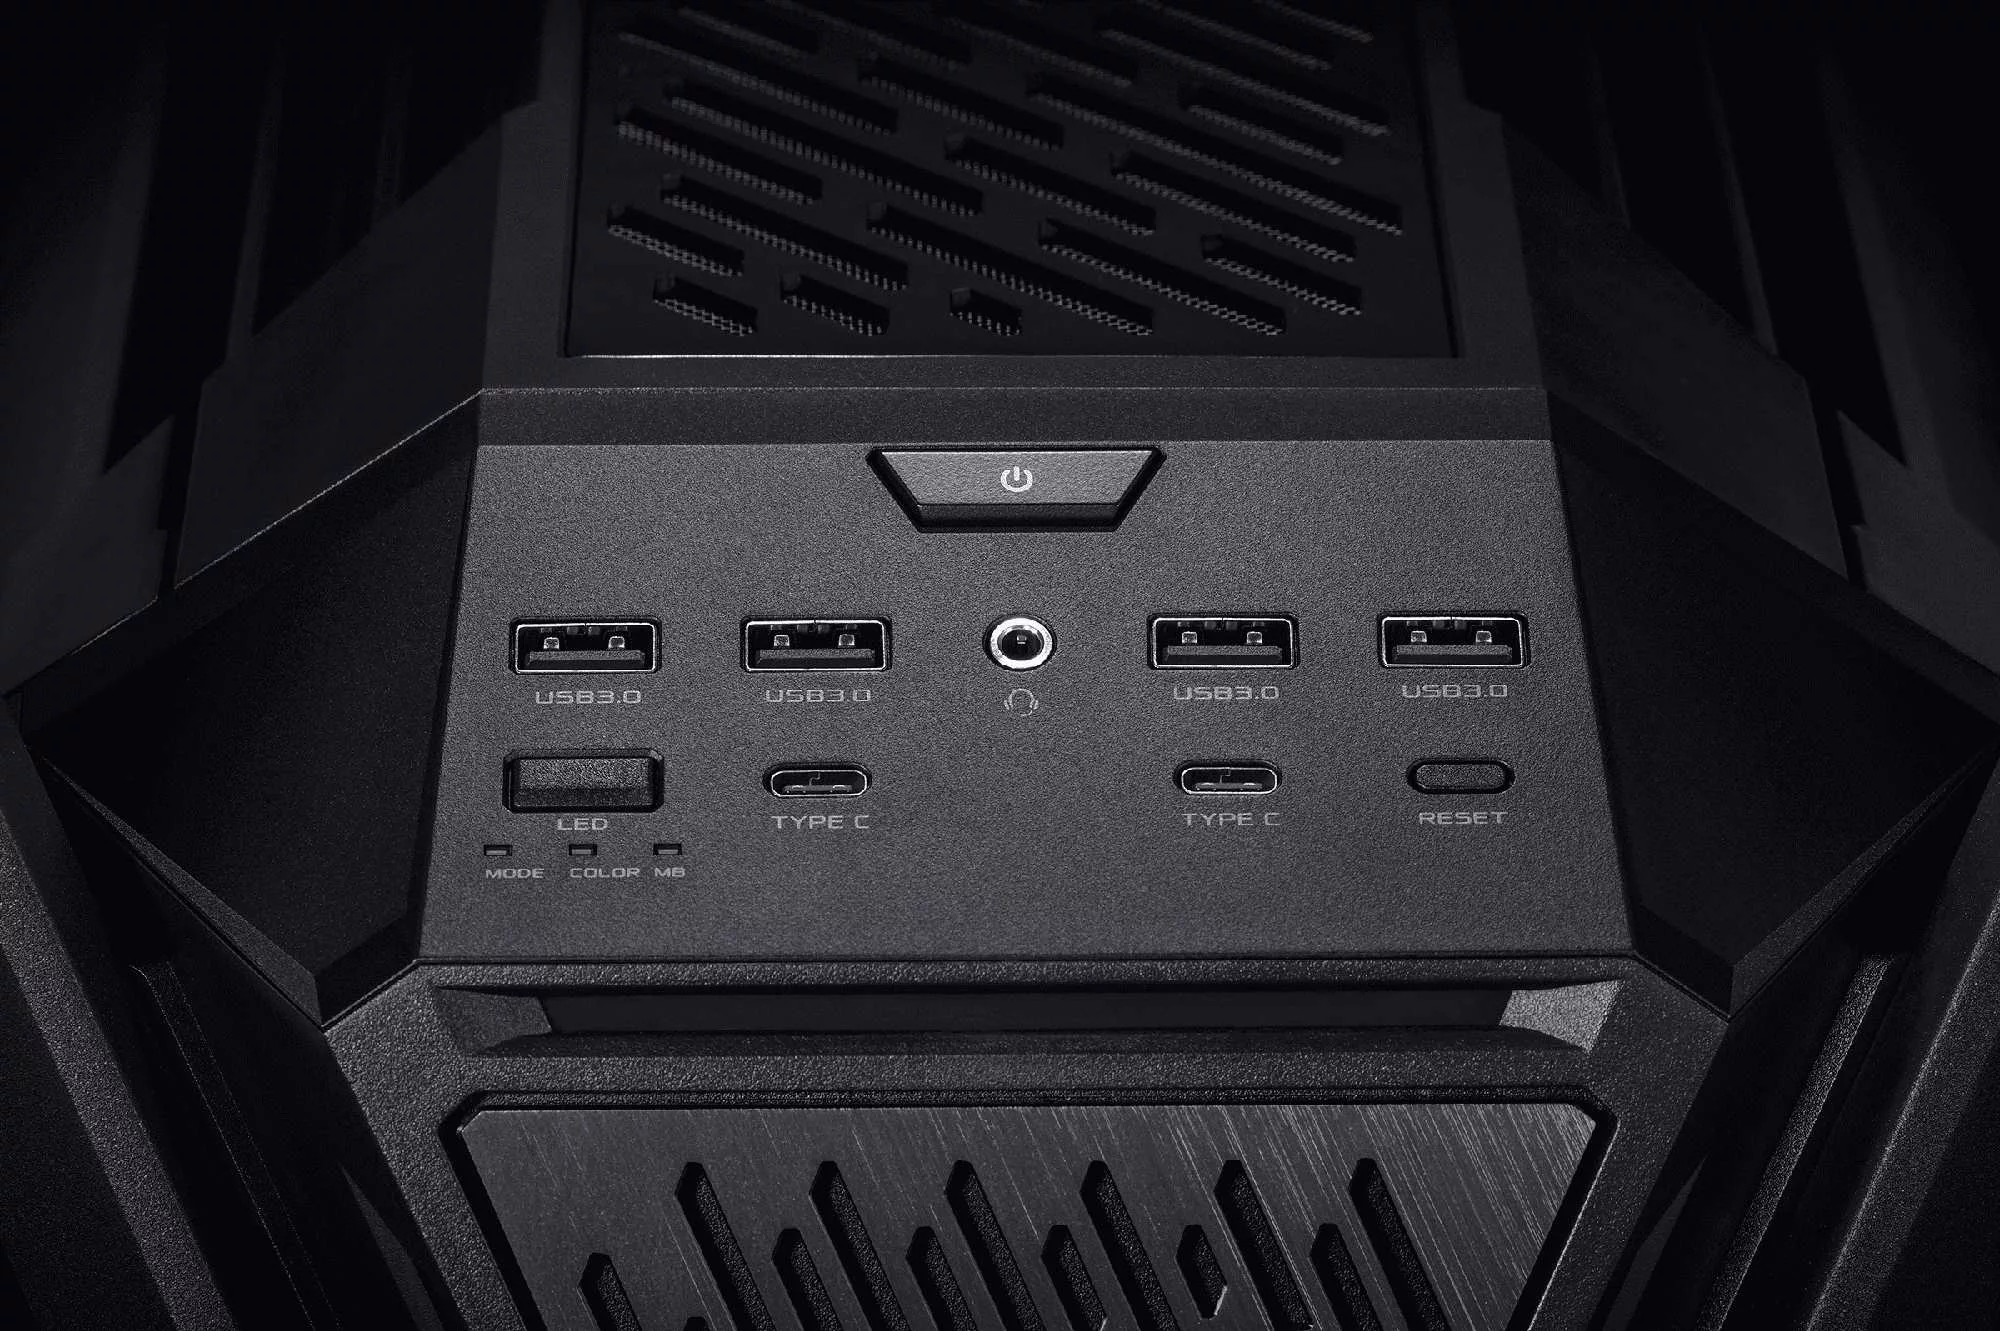 The front-panel connectors available on the ROG Hyperion GR701